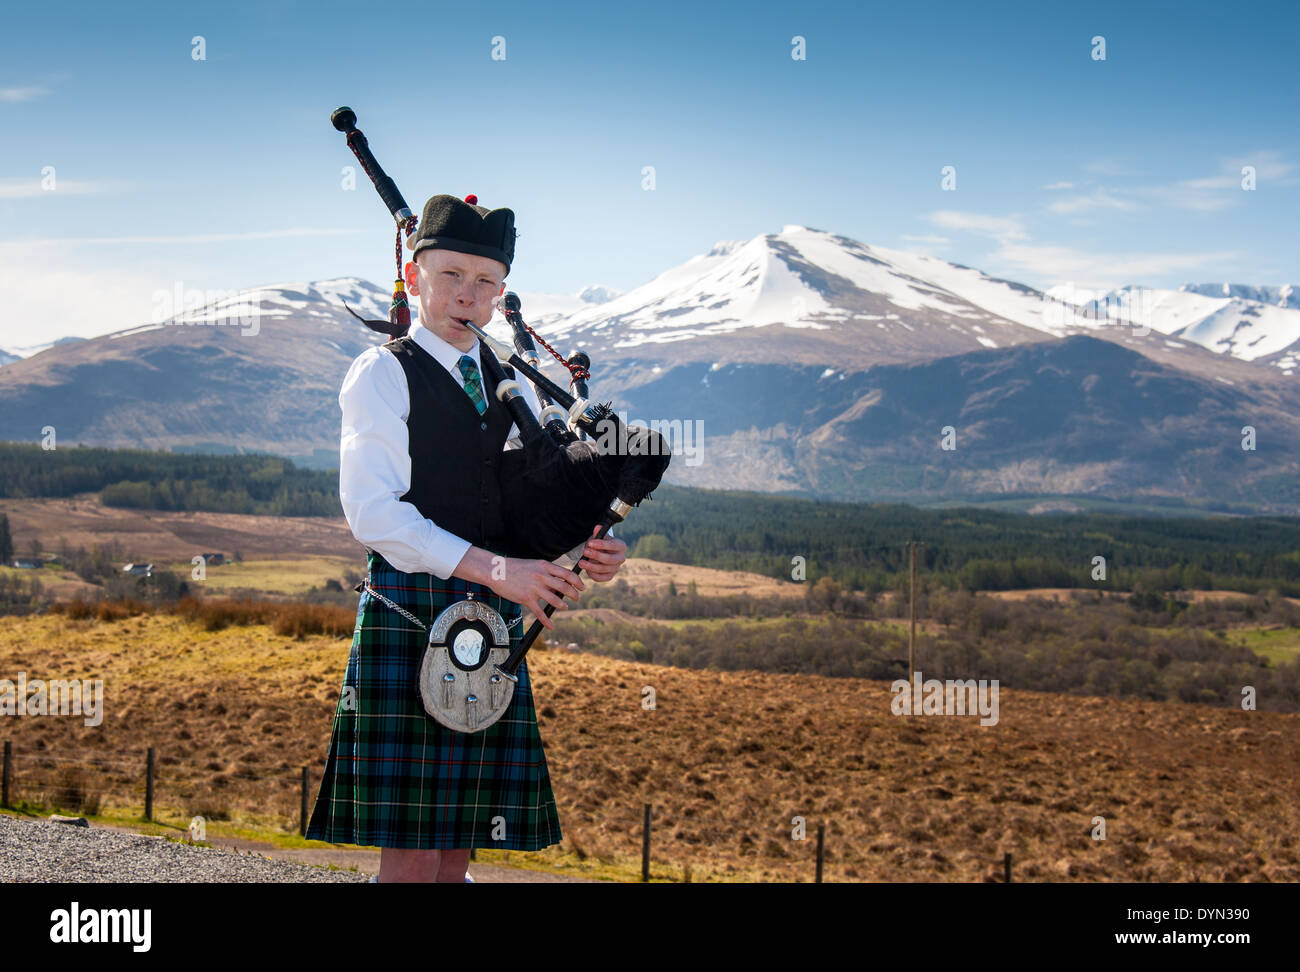 Bagpipe player with Ben Nevis mountain range in background, Scotland, UK Stock Photo